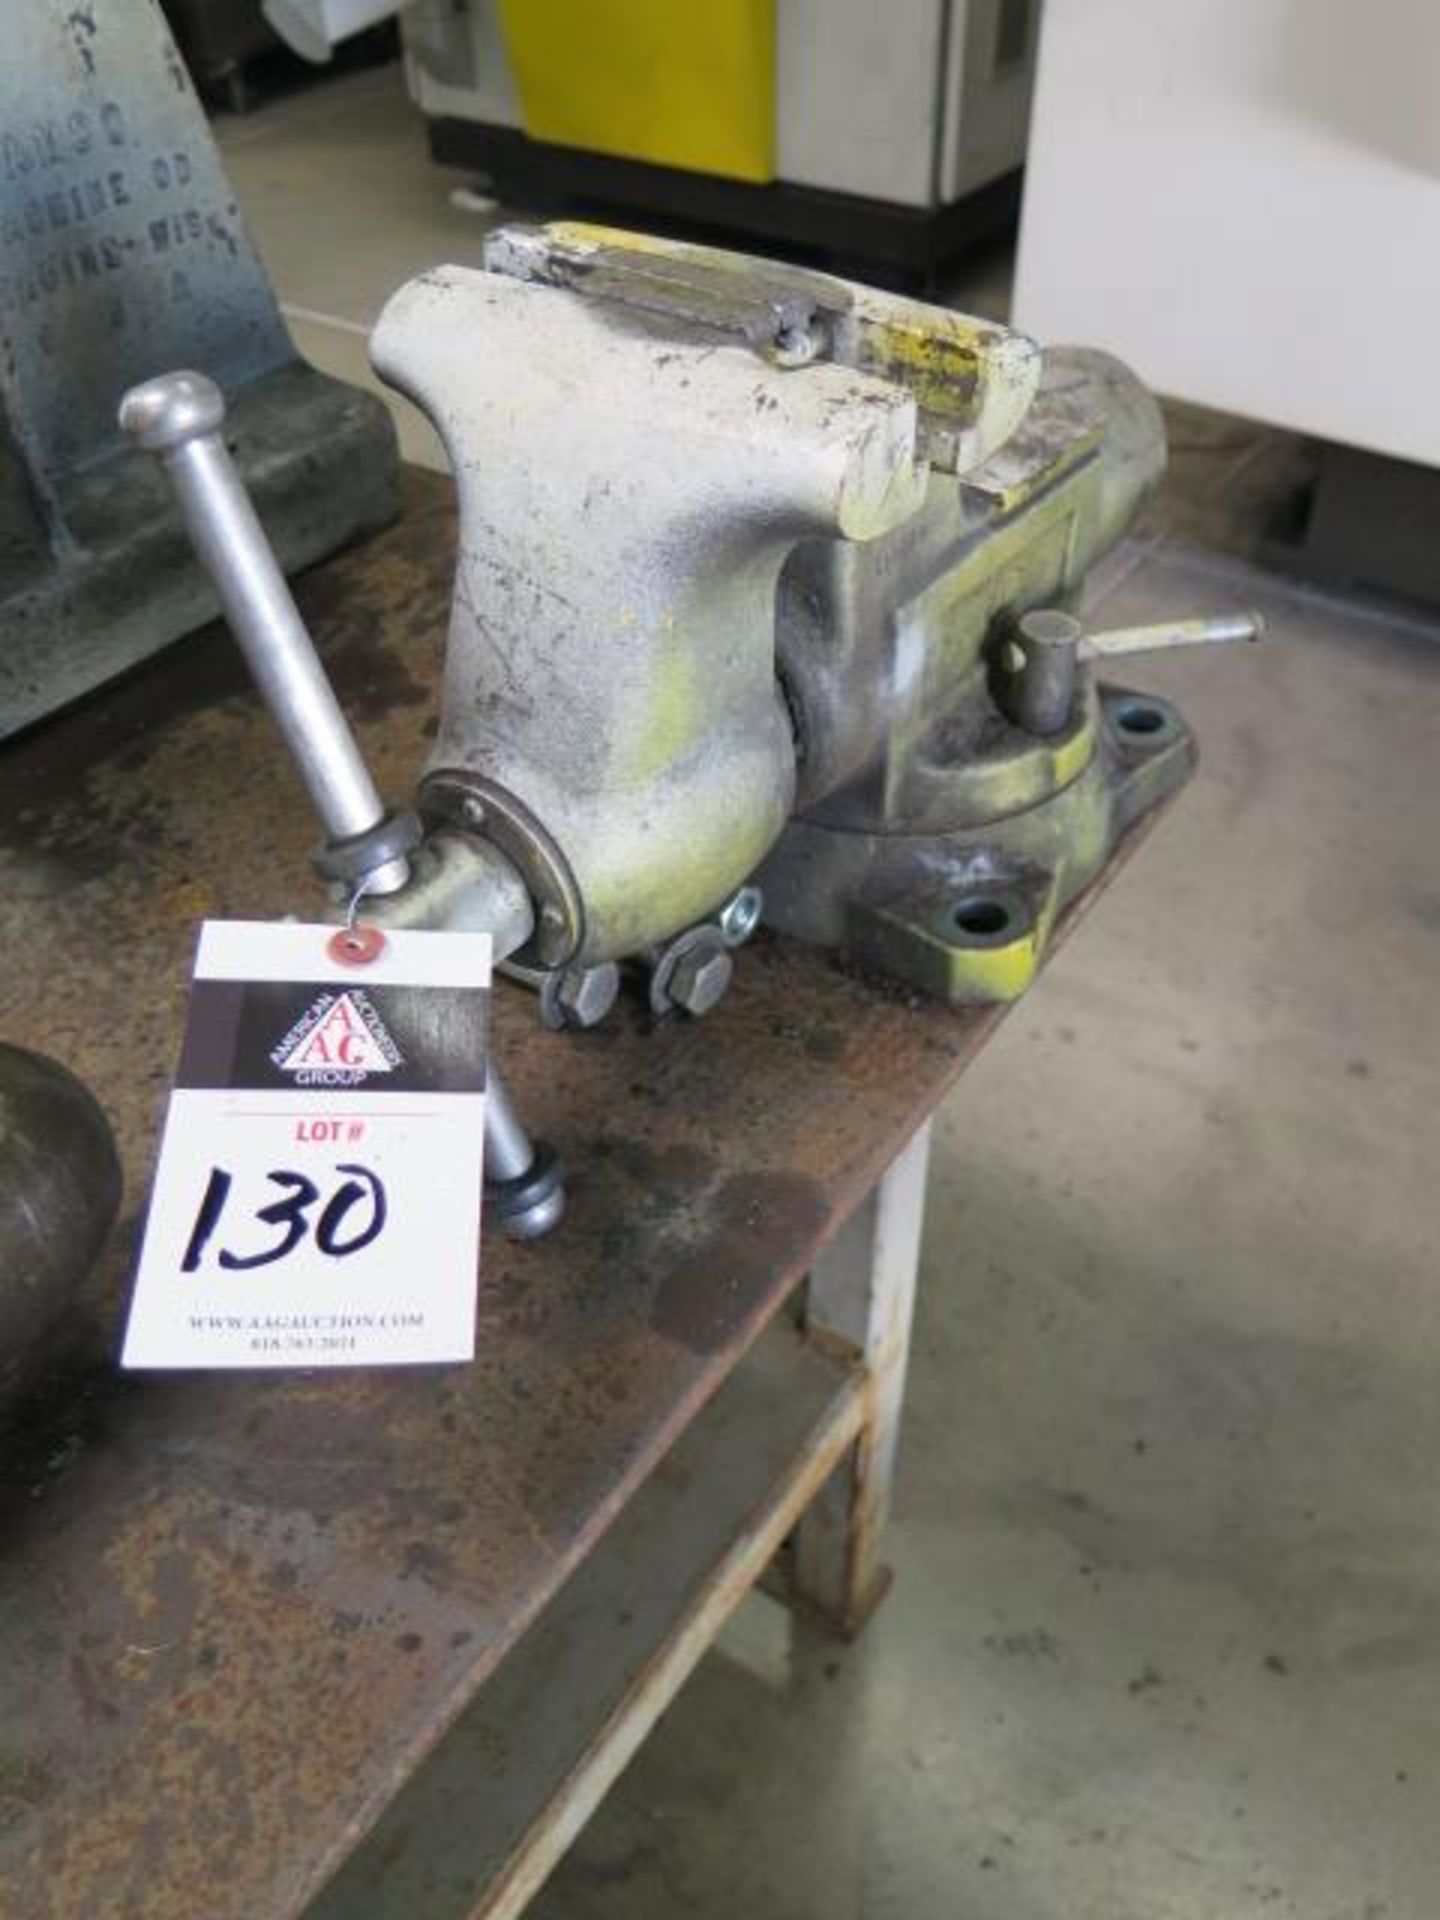 6 1/2" Bench Vise (SOLD AS-IS - NO WARRANTY)